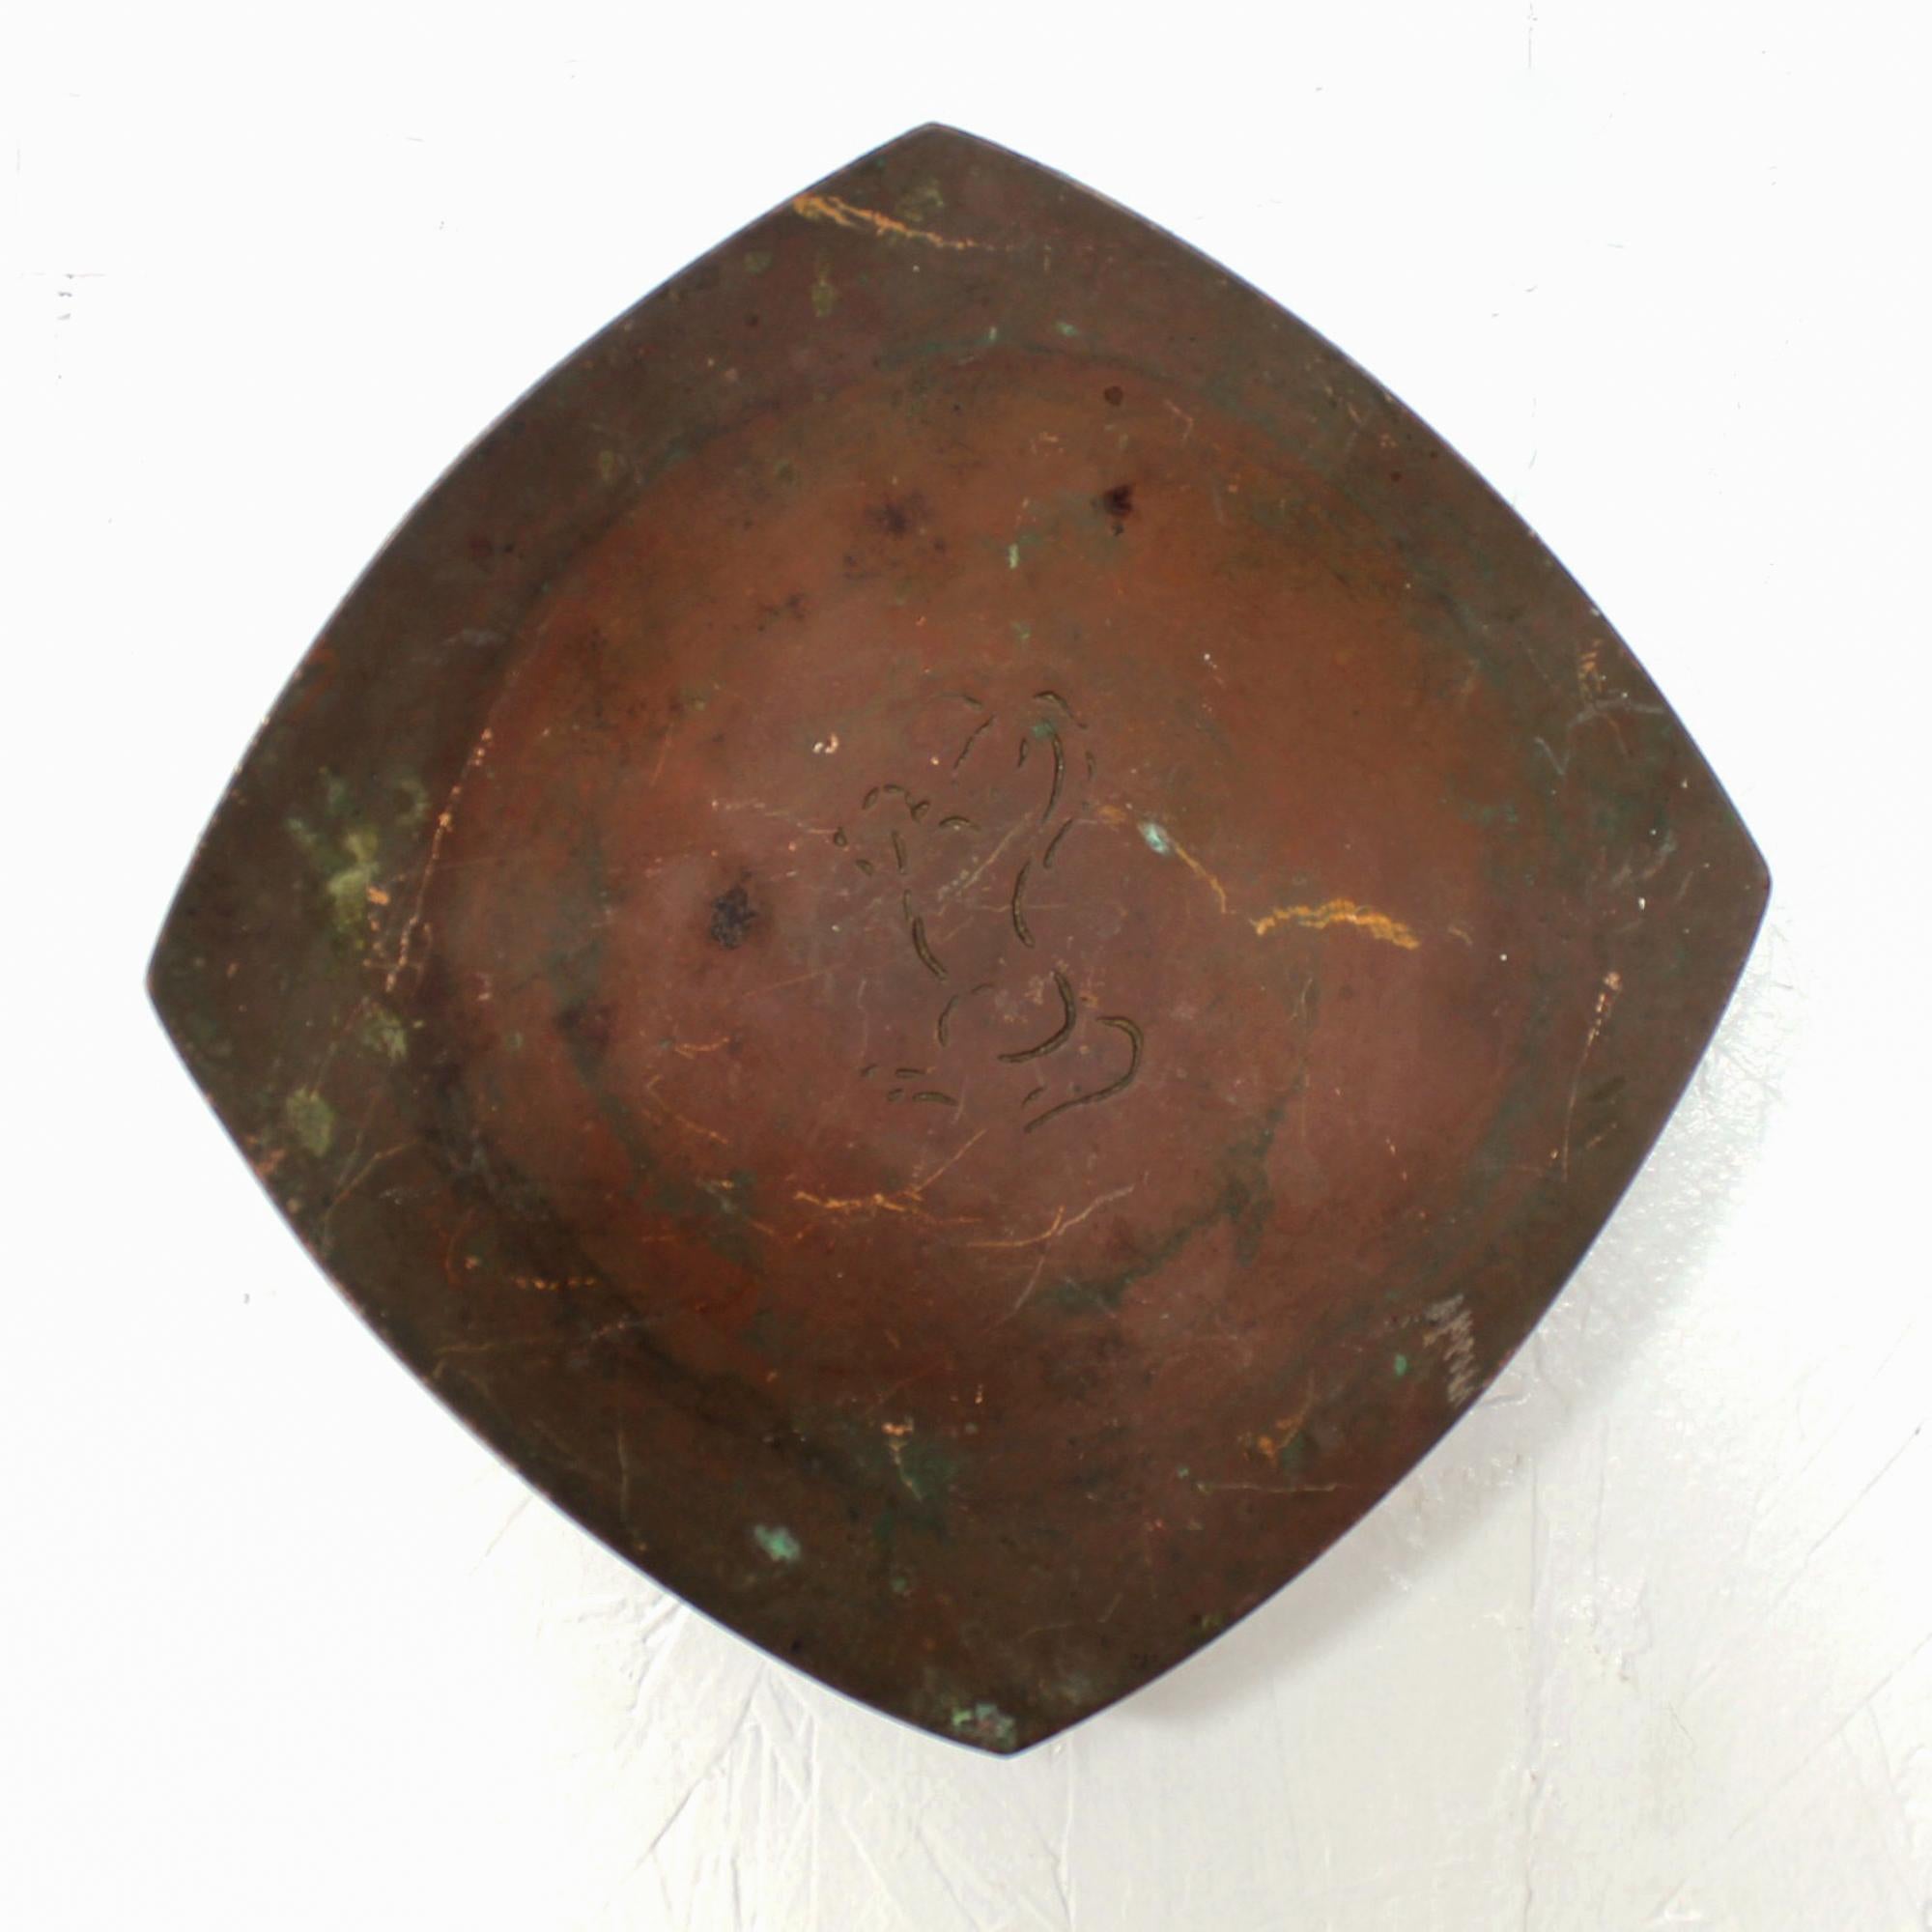 Beautiful patinated bronze tray dish or wall art designed by California Artist and Sculptor Wah Ming Chang (1917-2003). This warmly-colored work, presents in a rounded square shape featuring a simplified engraved horse design in the center.
Stamped